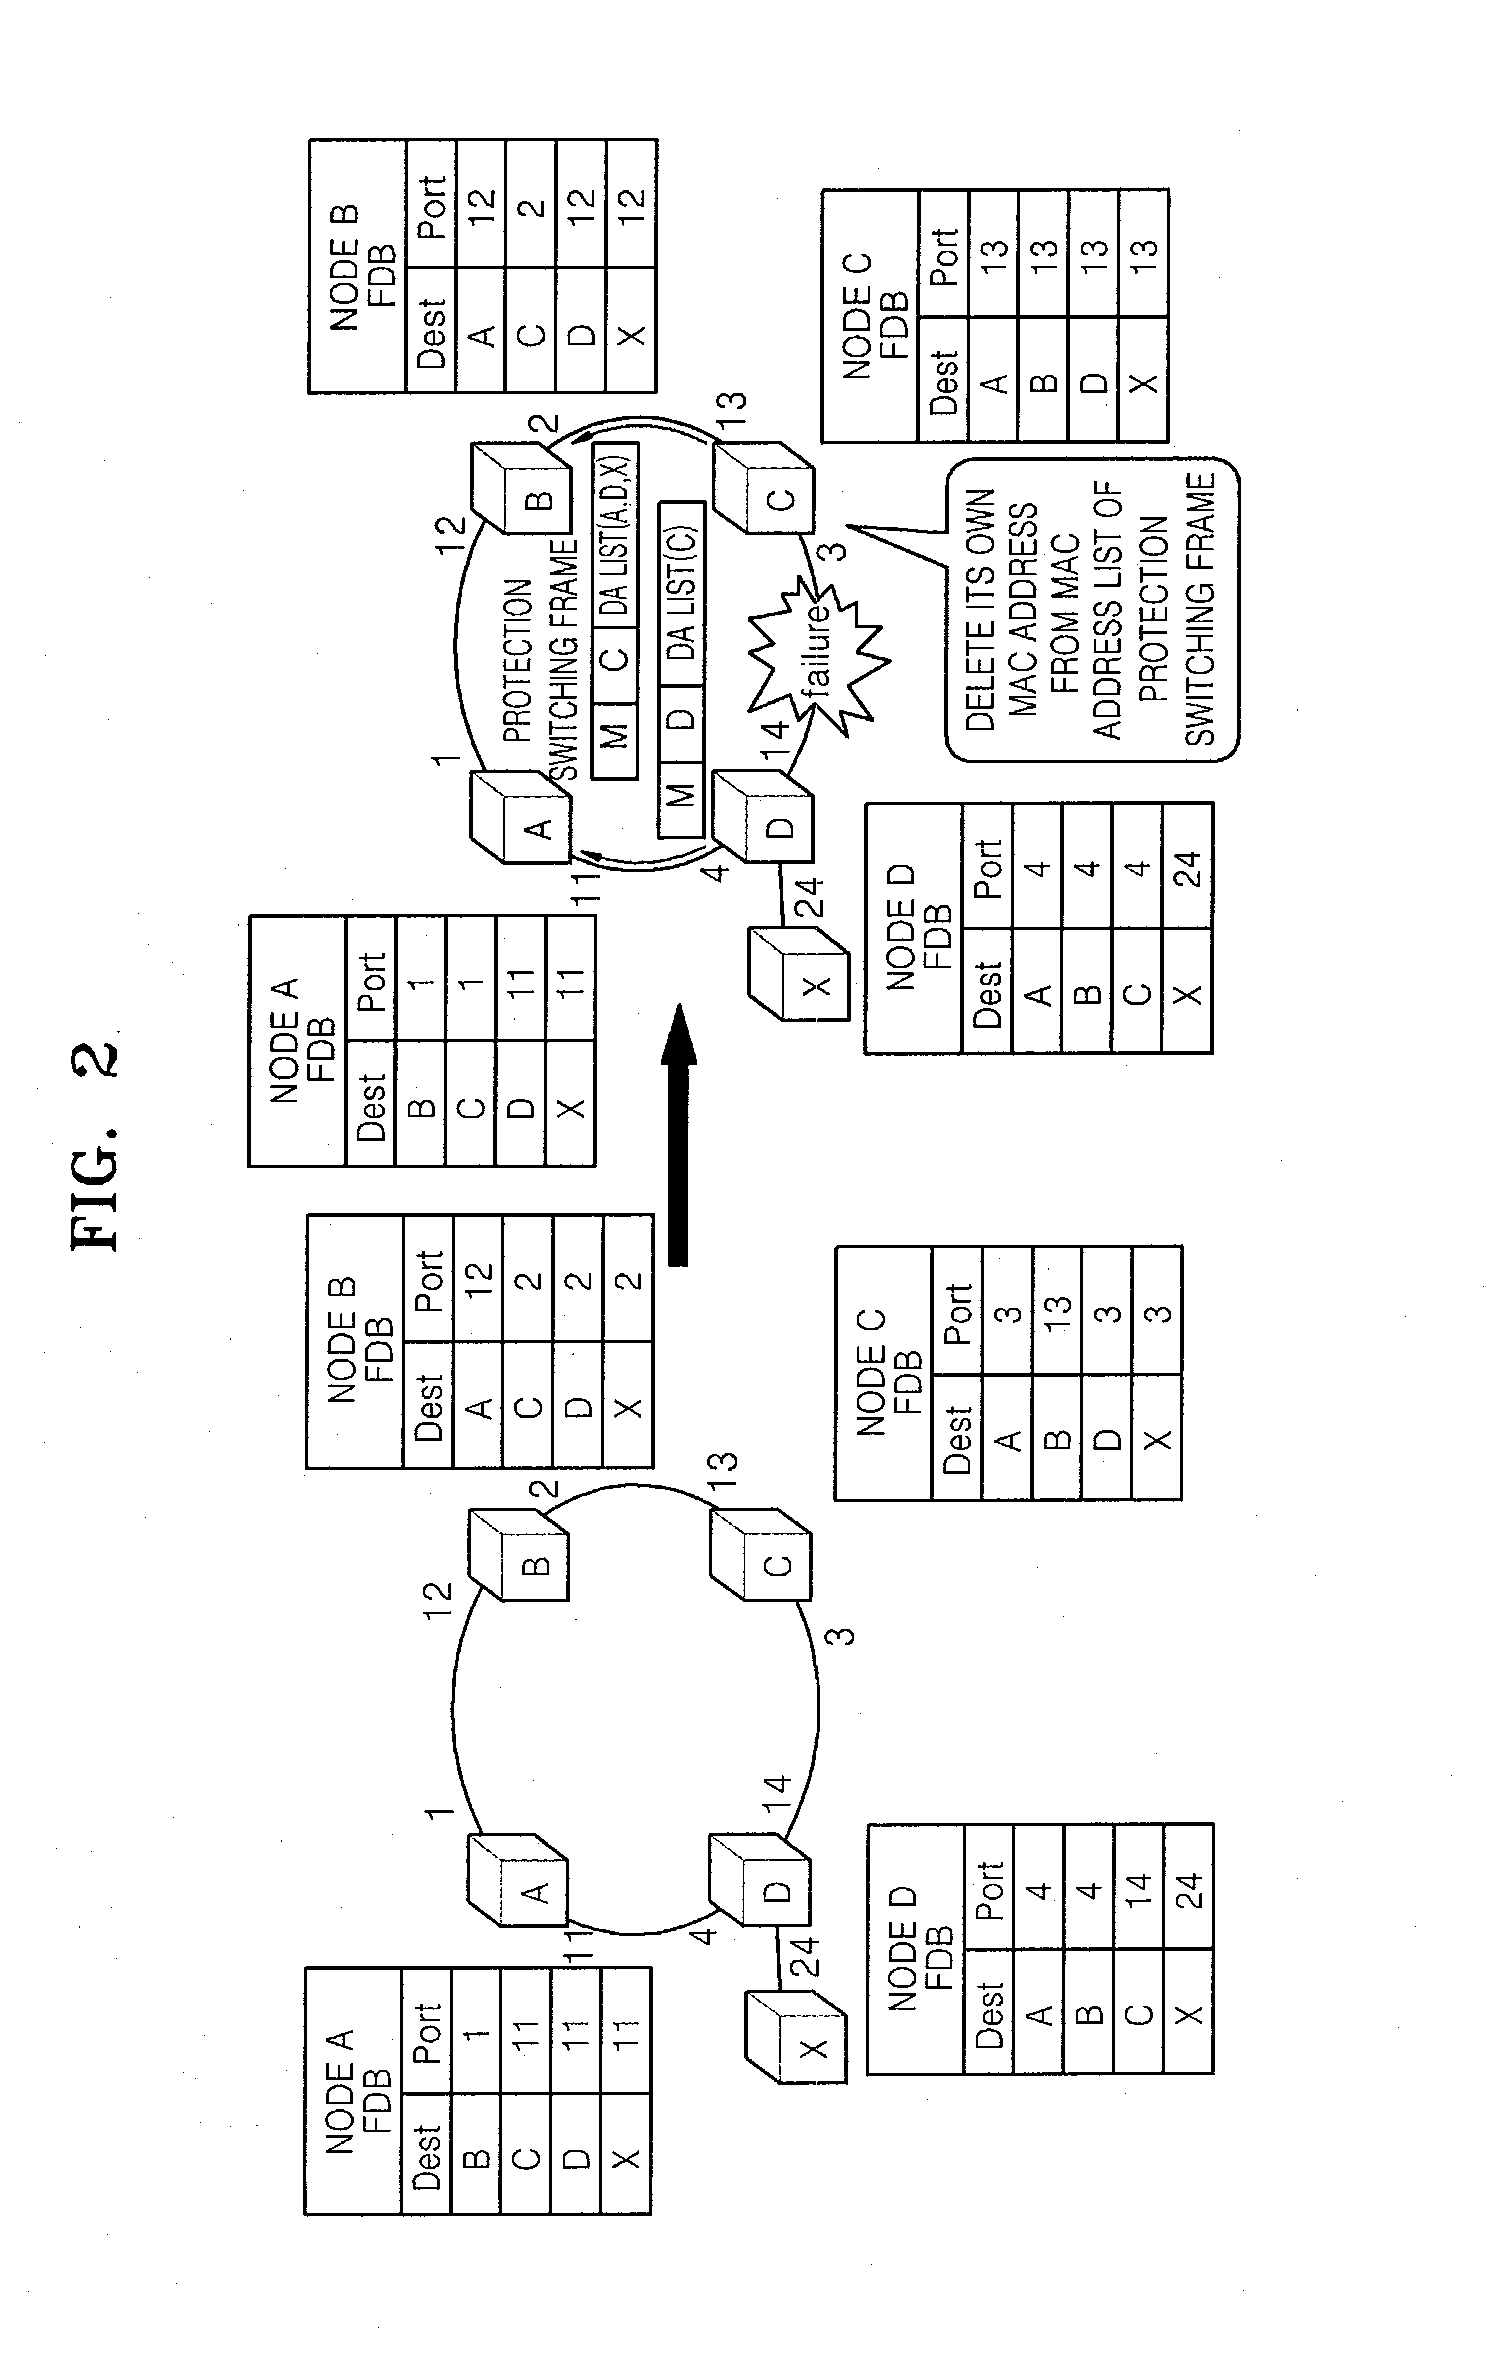 Method for protection switching in ethernet ring network